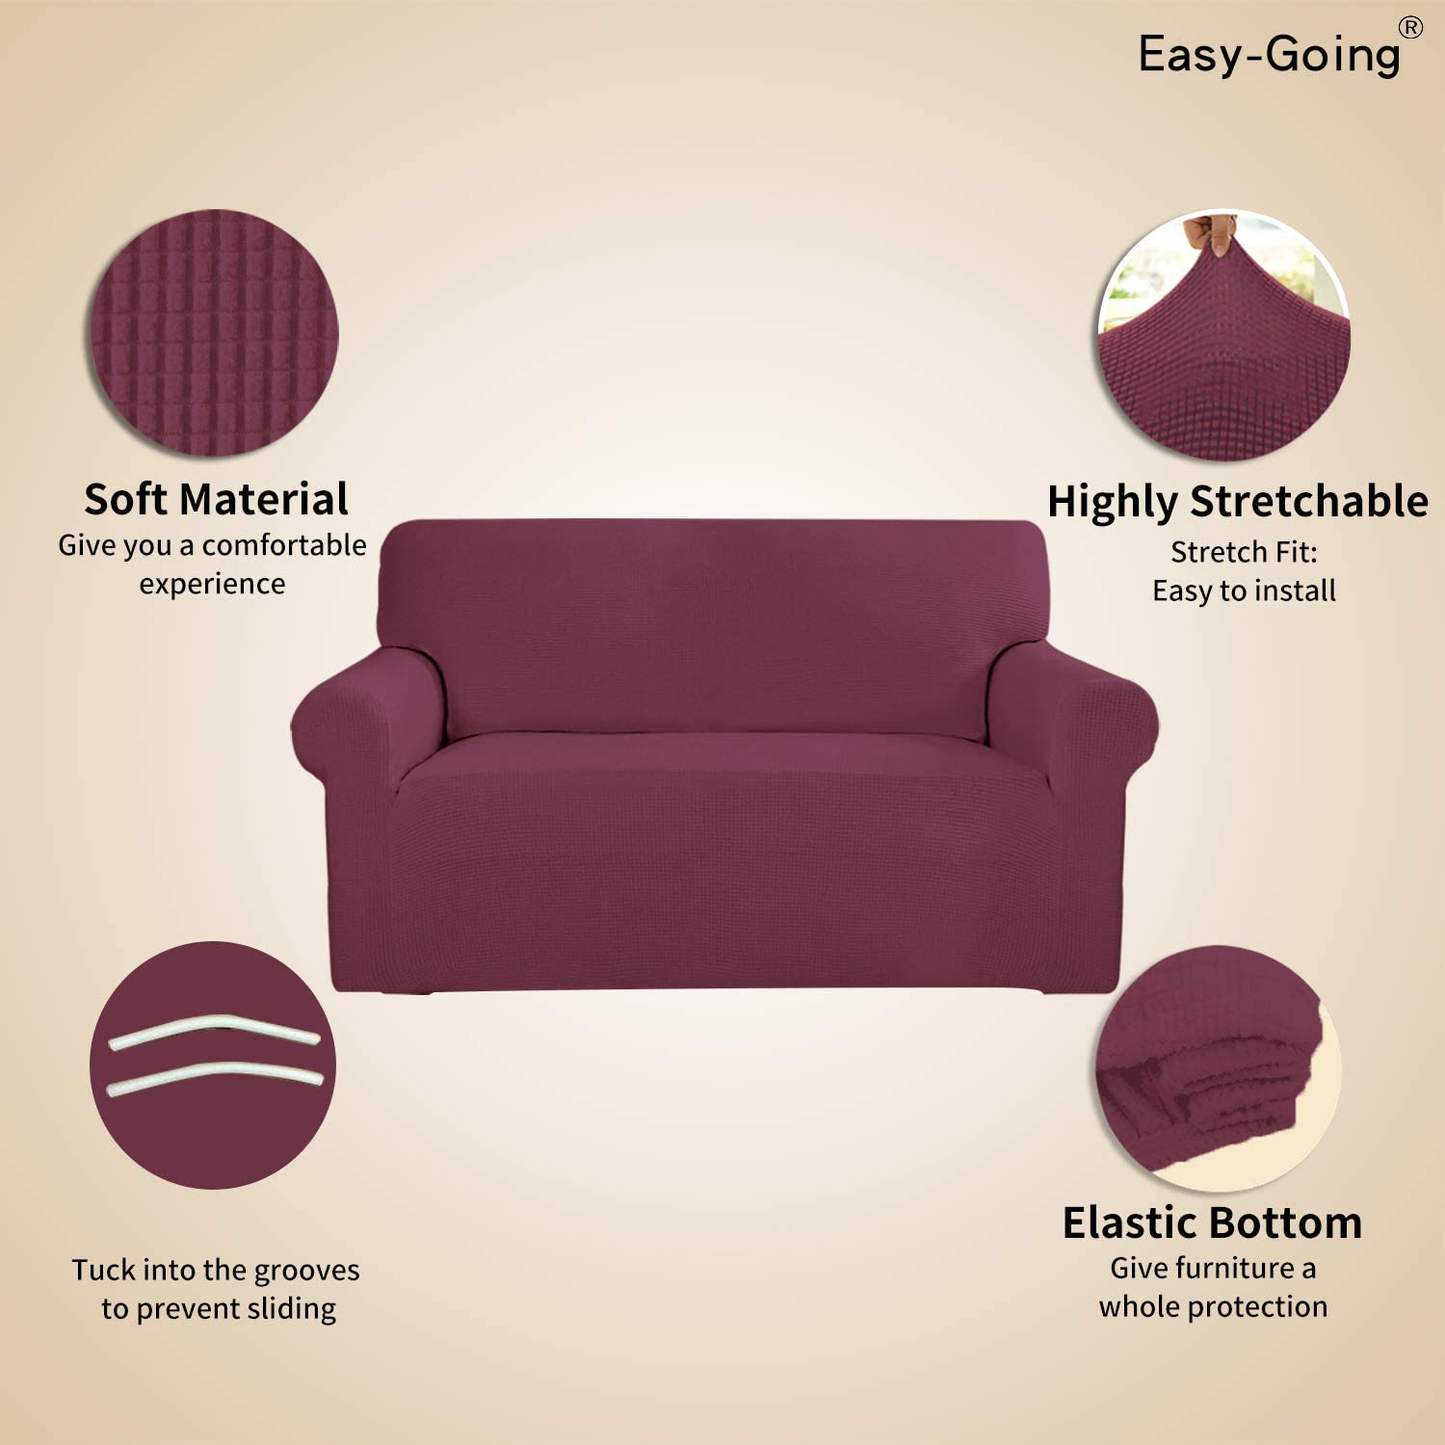 Easy-Going Stretch 4 Seater Sofa Slipcover 1-Piece Sofa Cover Furniture Protector Couch Soft with Elastic Bottom for Kids,Polyester Spandex Jacquard Fabric Small Checks (XX Large,Wine)